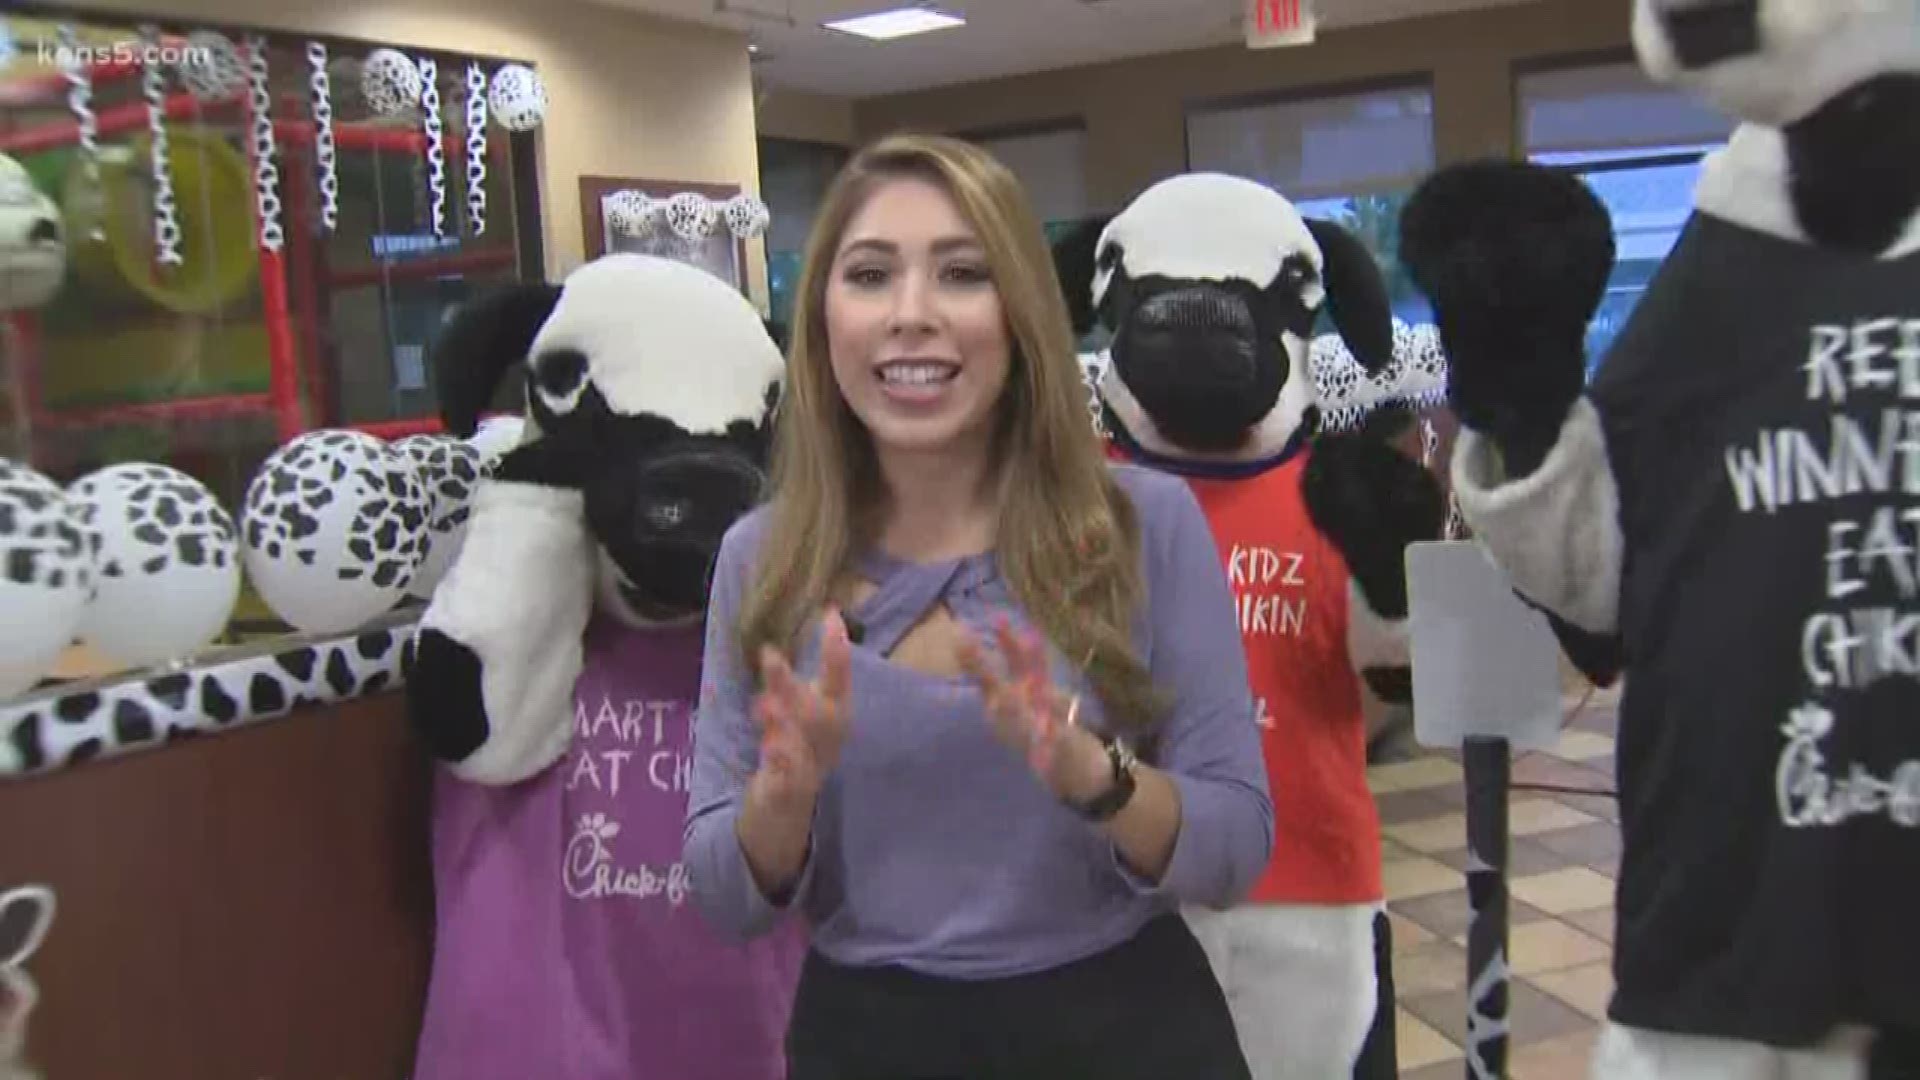 Grab your cow costumes because Tuesday is FREE Chick-fil-A Day if you come dressed as a cow!